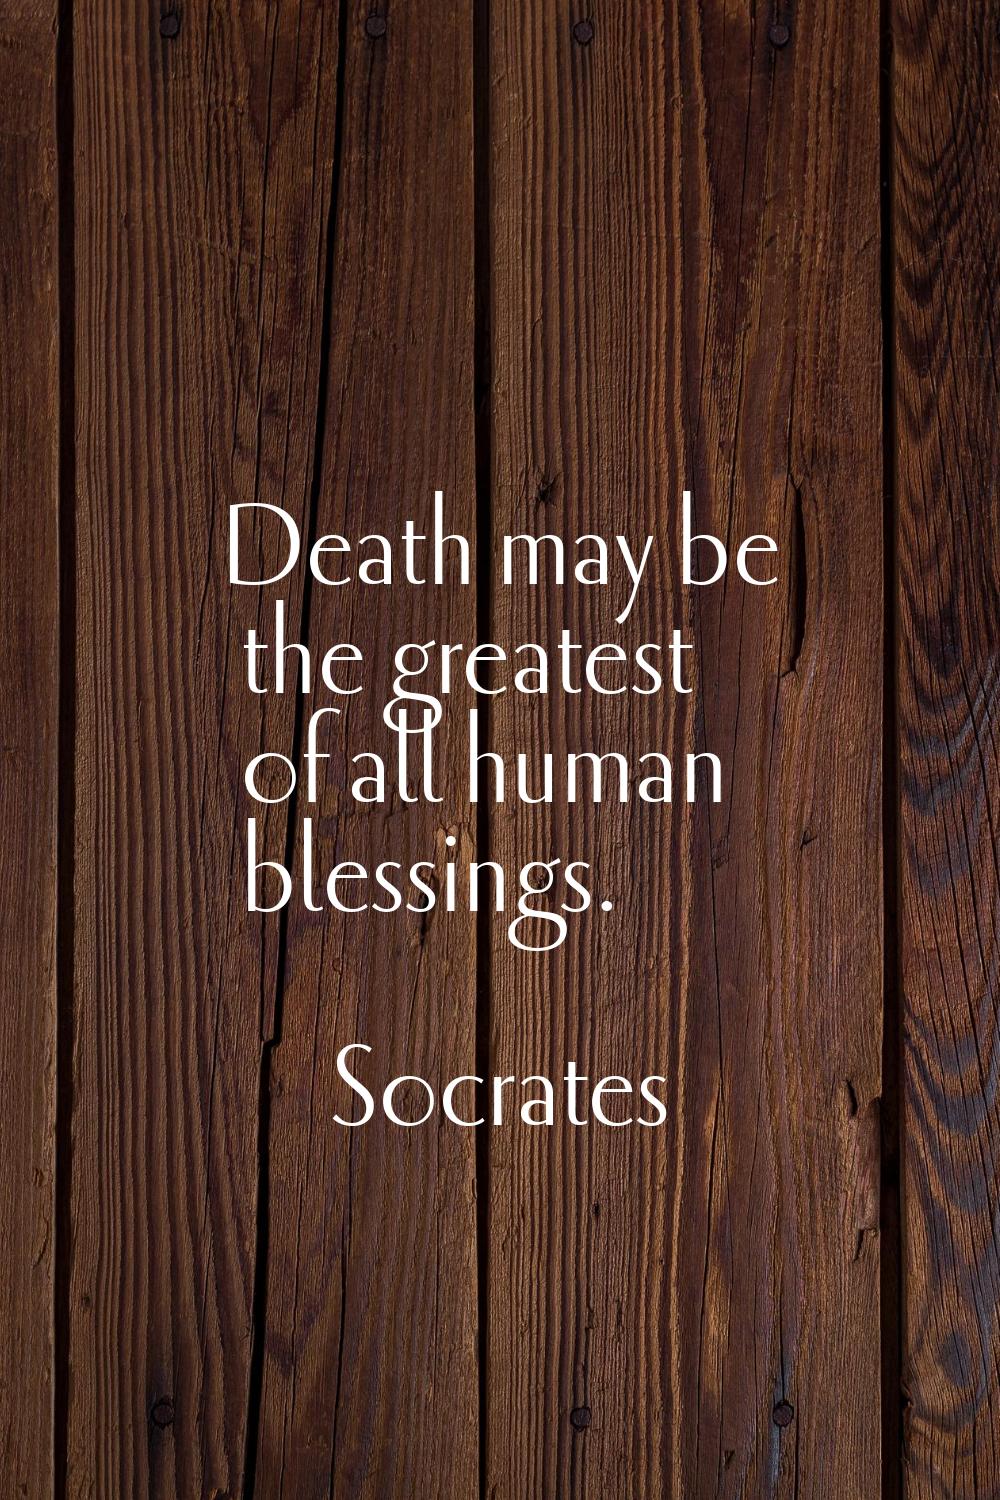 Death may be the greatest of all human blessings.